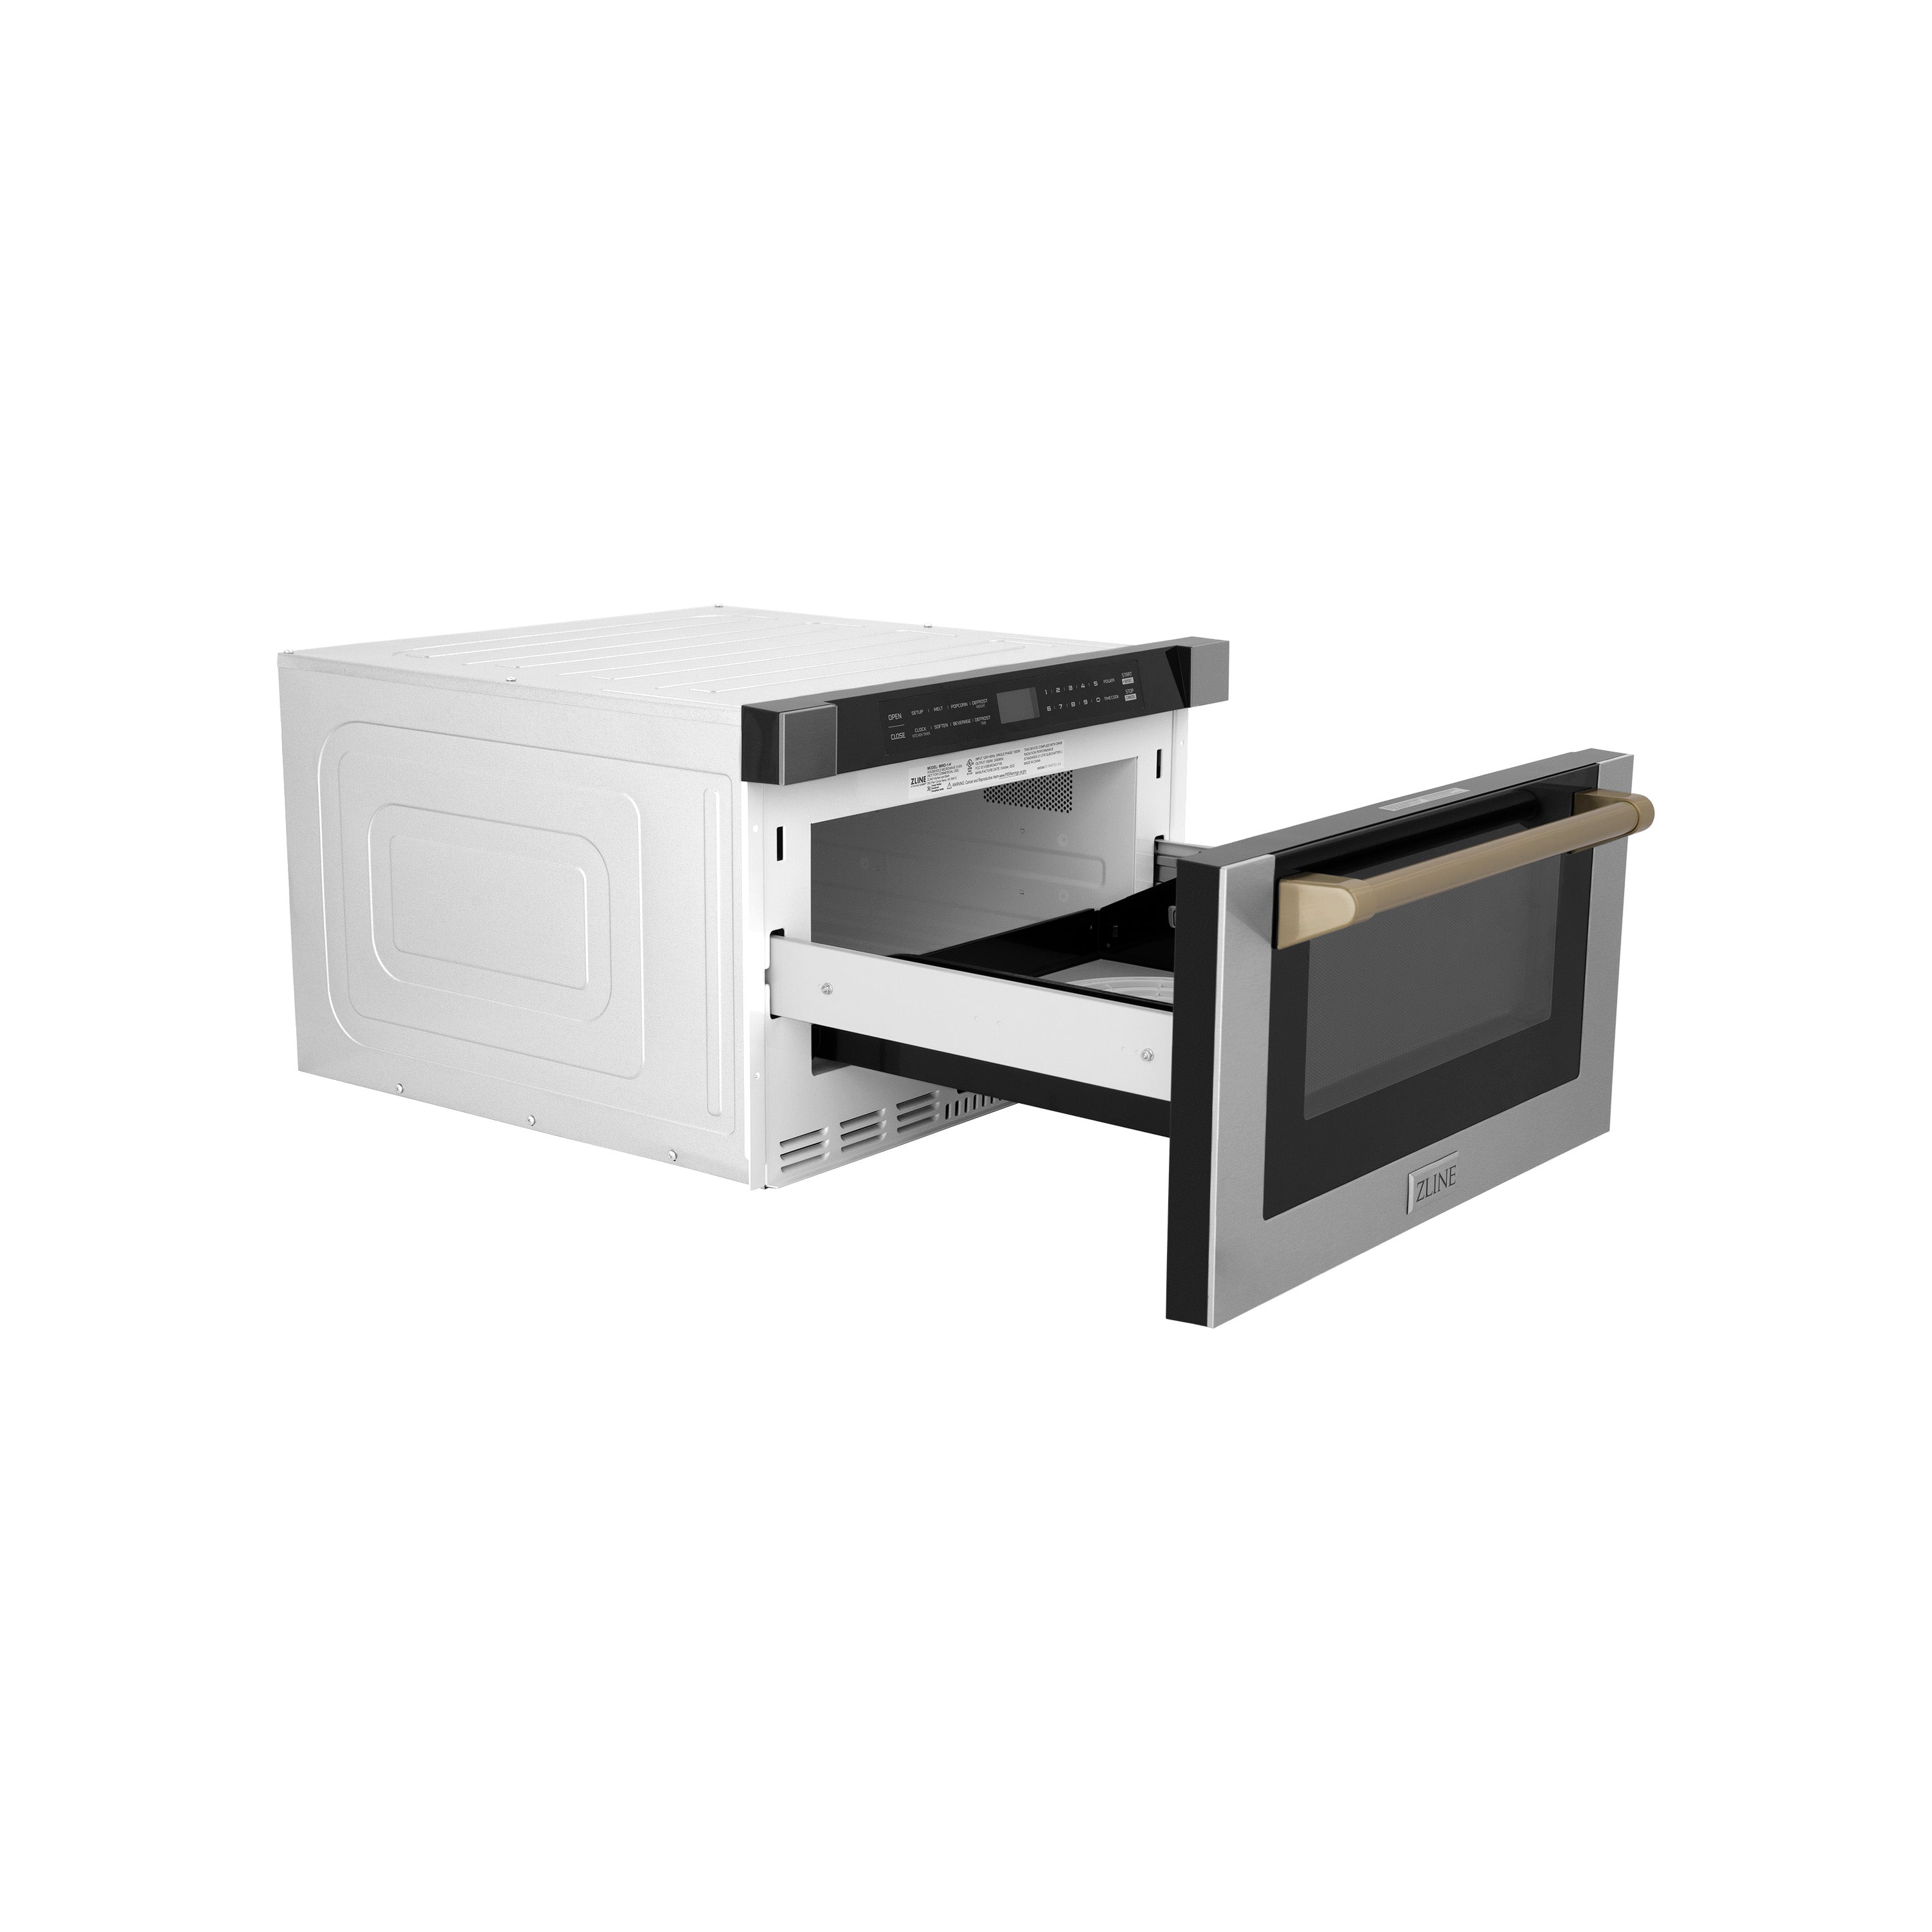 ZLINE Autograph Edition 24 in. 1.2 cu. ft. Built-in Microwave Drawer with a Traditional Handle in Stainless Steel and Champagne Bronze Accents (MWDZ-1-H-CB) Opposite Side View Drawer Open